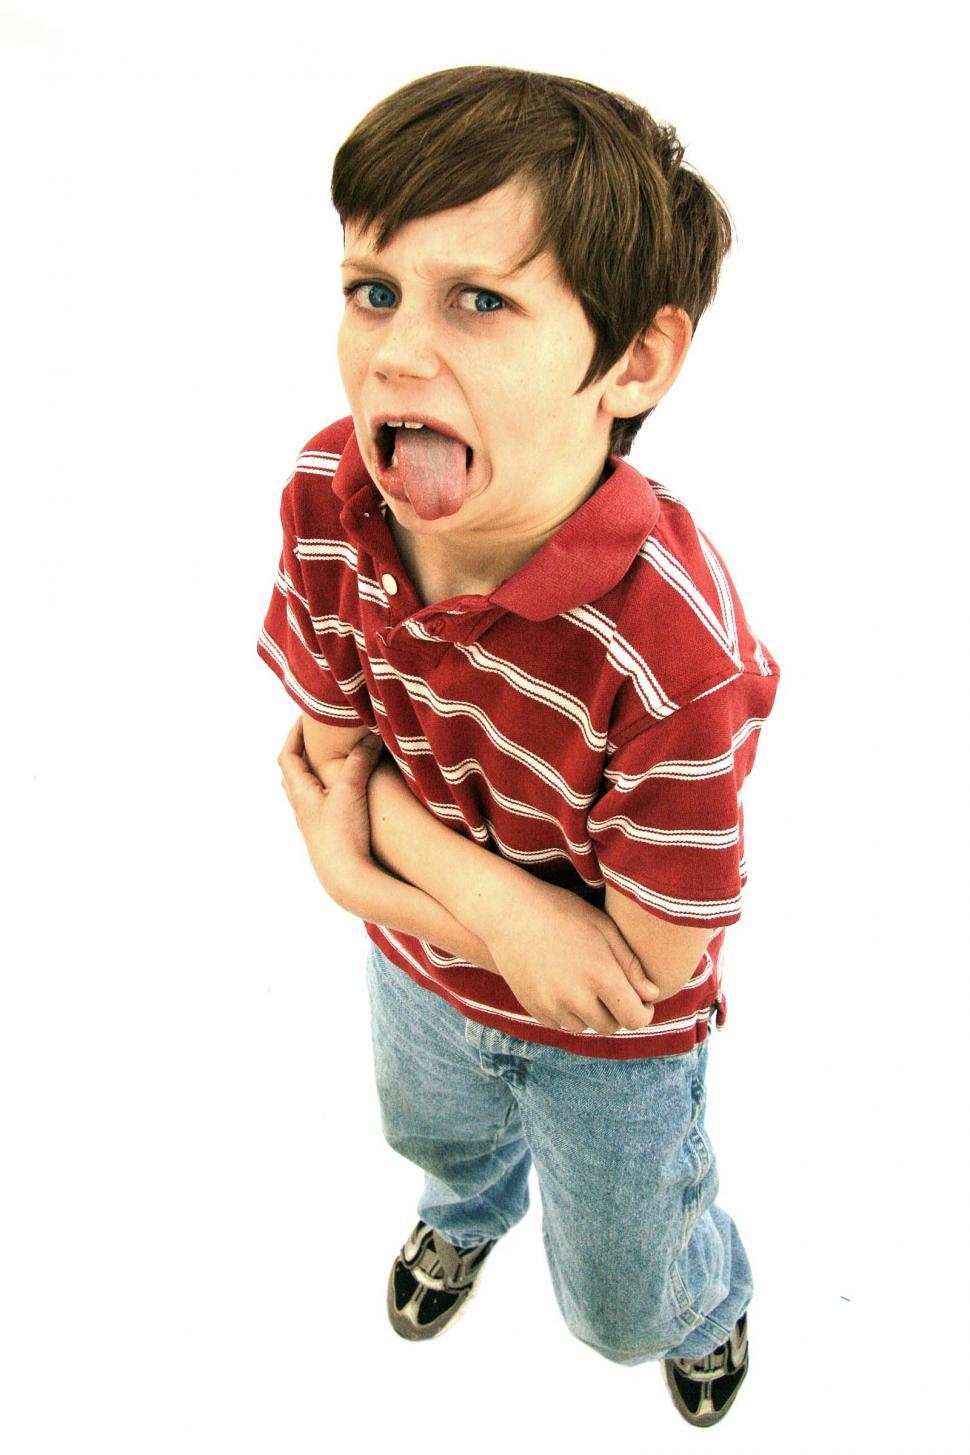 Download Free Stock Photo of Boy with goofy disgusted look and arms crossed 